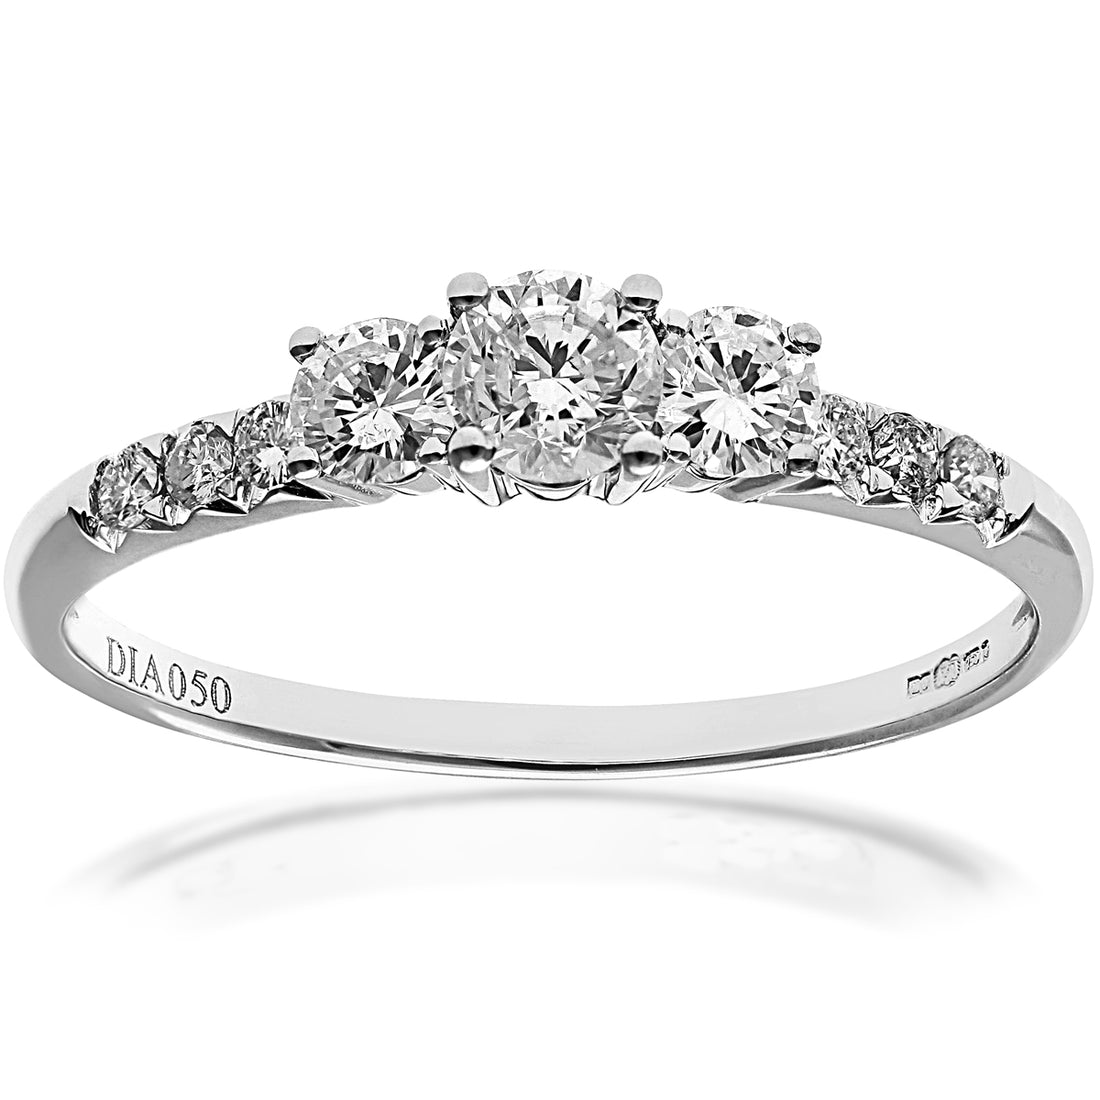 18ct White Gold 1/2ct Certified Diamonds Trilogy Engagement Ring